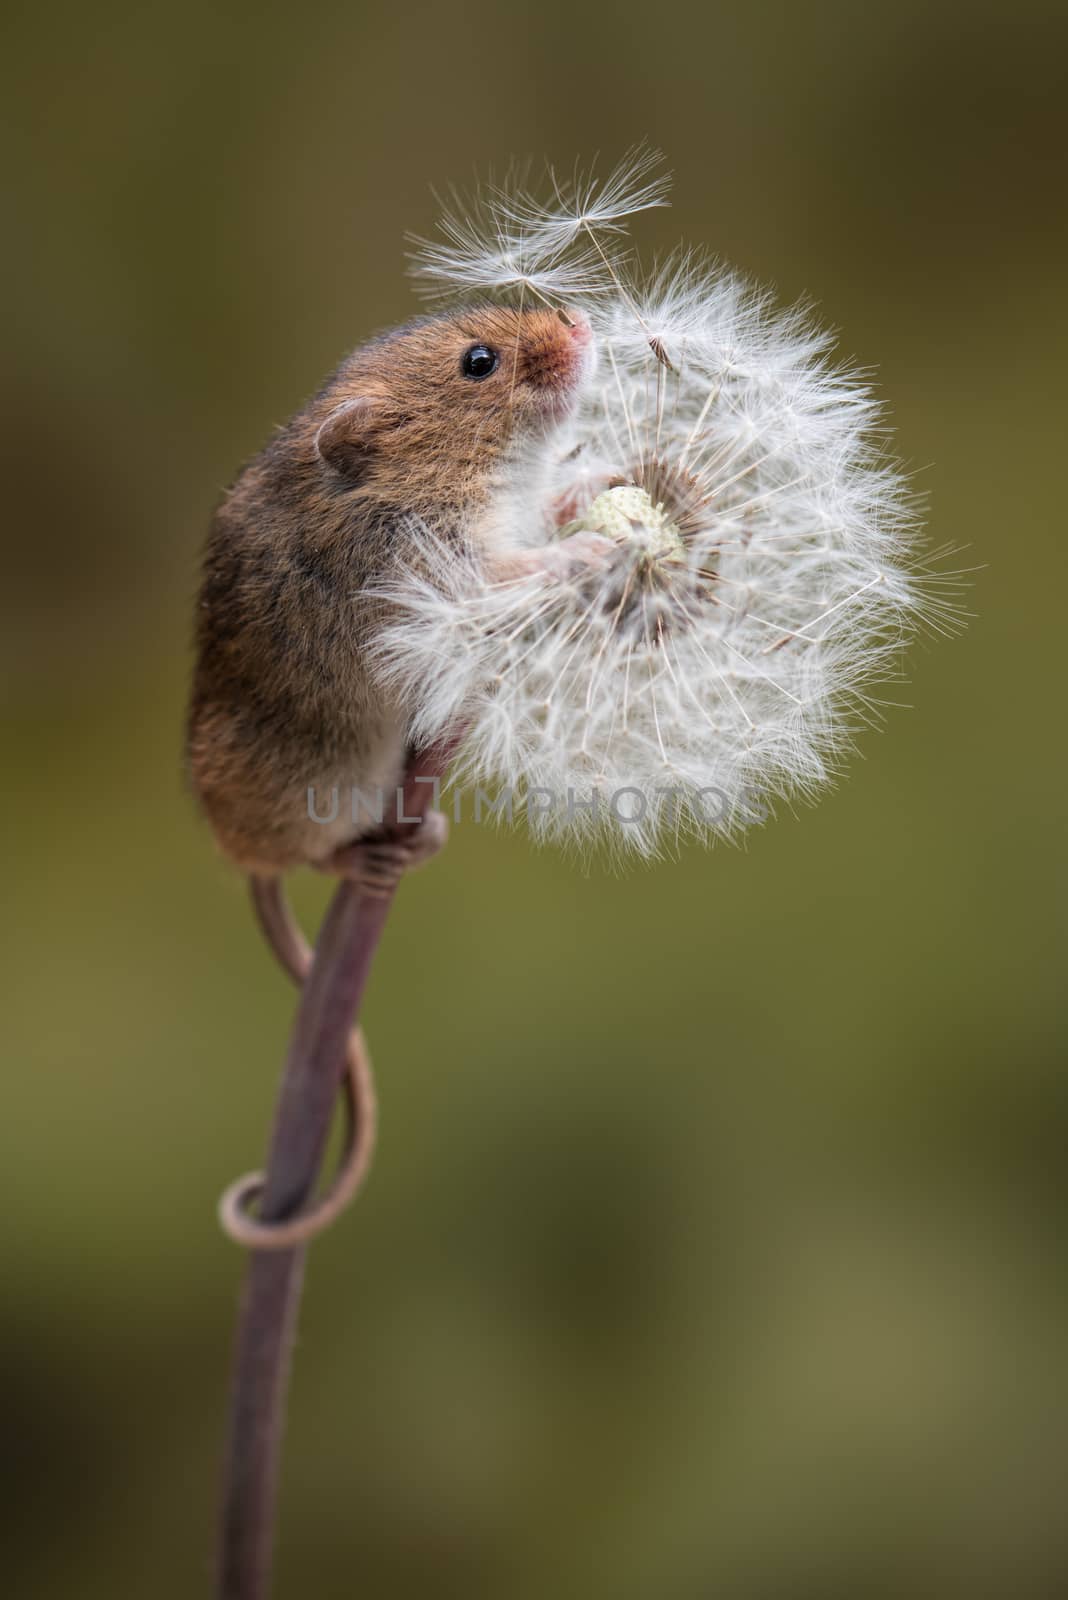 A full length portrait of a harvest mouse climbing up a dandelion clock with tail wrapped around the stem